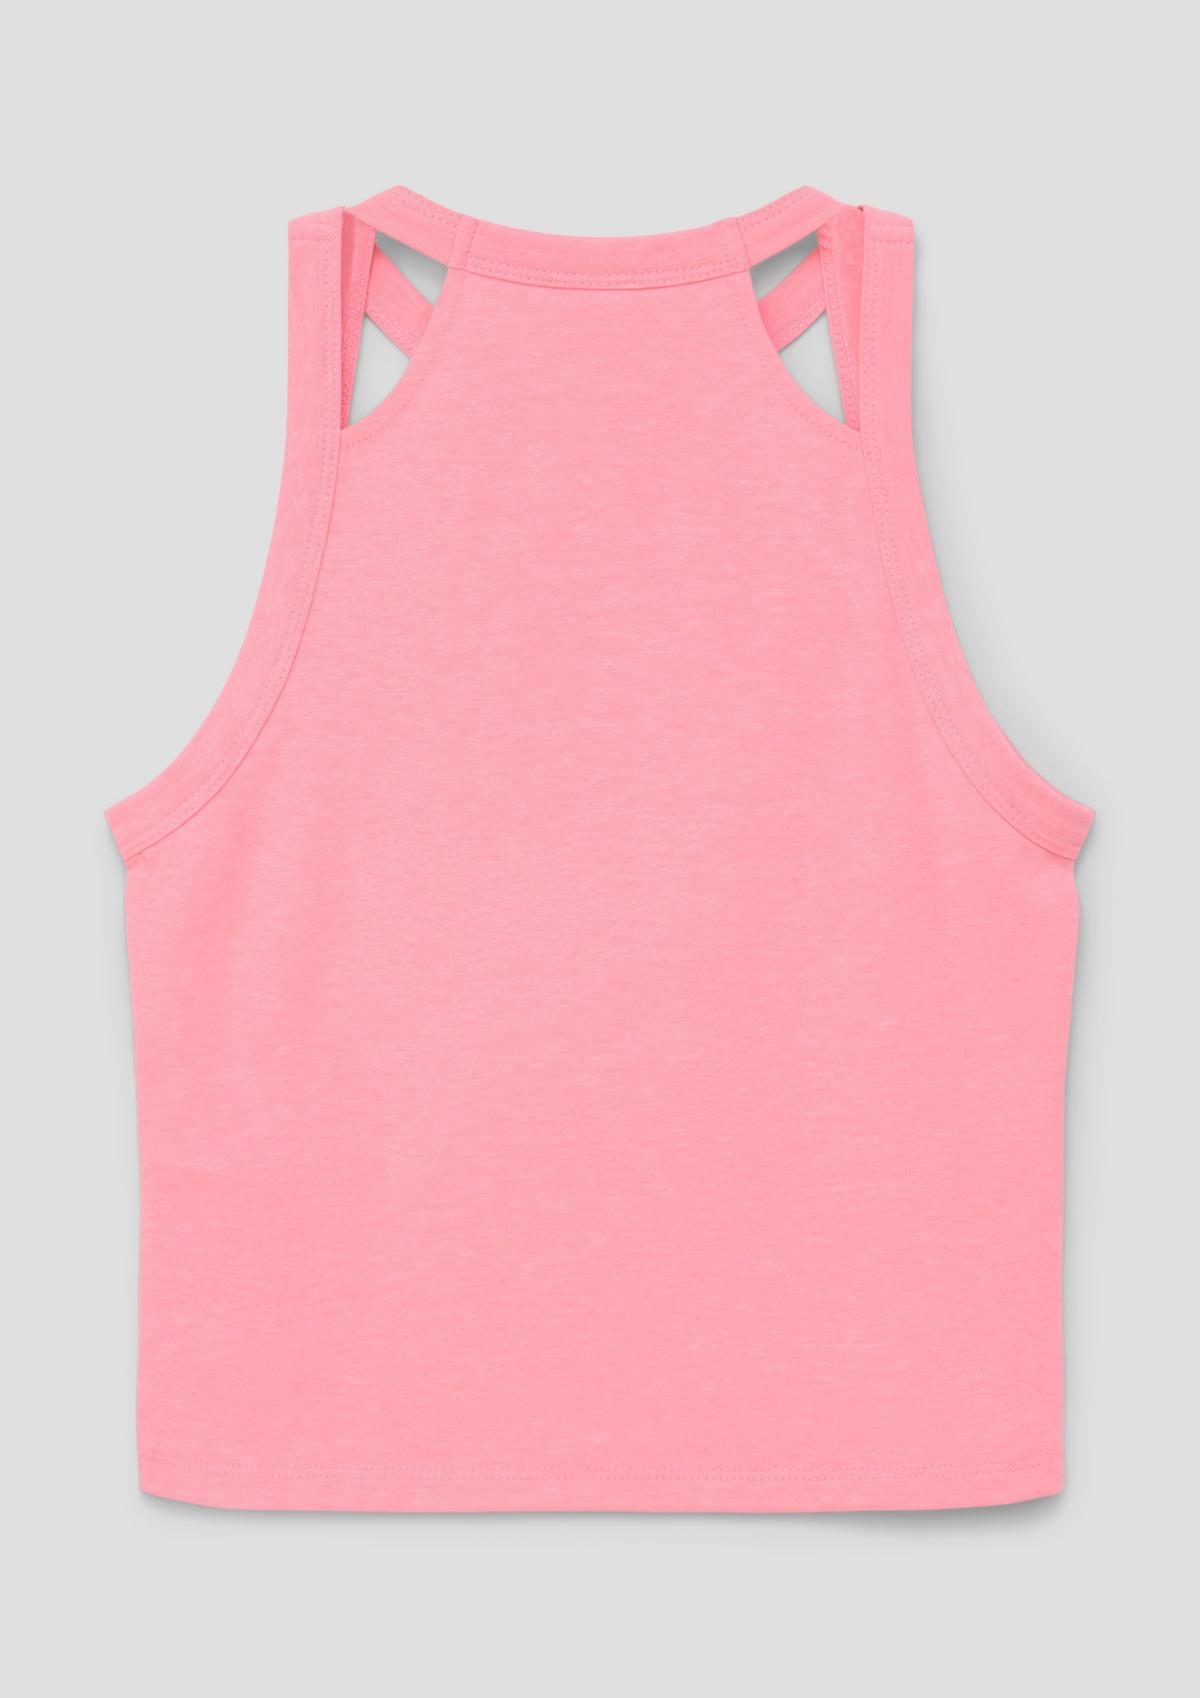 s.Oliver Sleeveless top with cut-out details